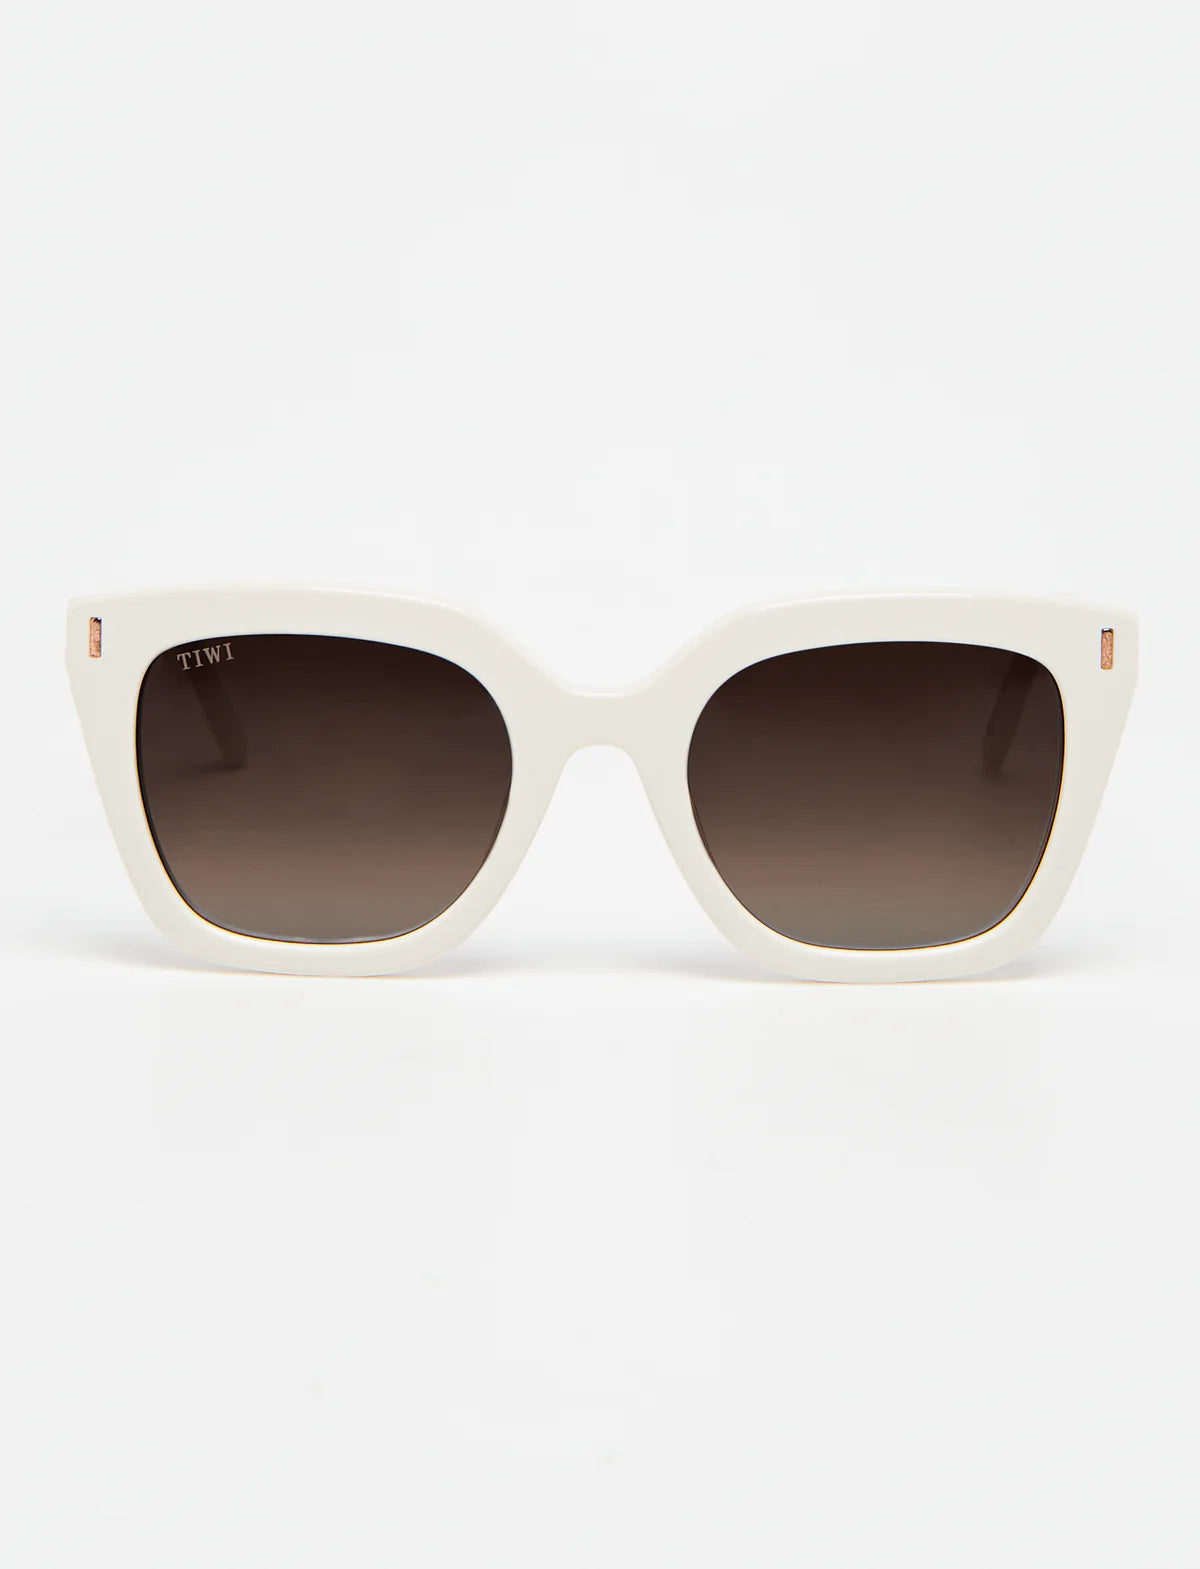 Limited Edition - Collection 1/300 Sunglasses TIWI USA Hale White Limited Edition 1/300  